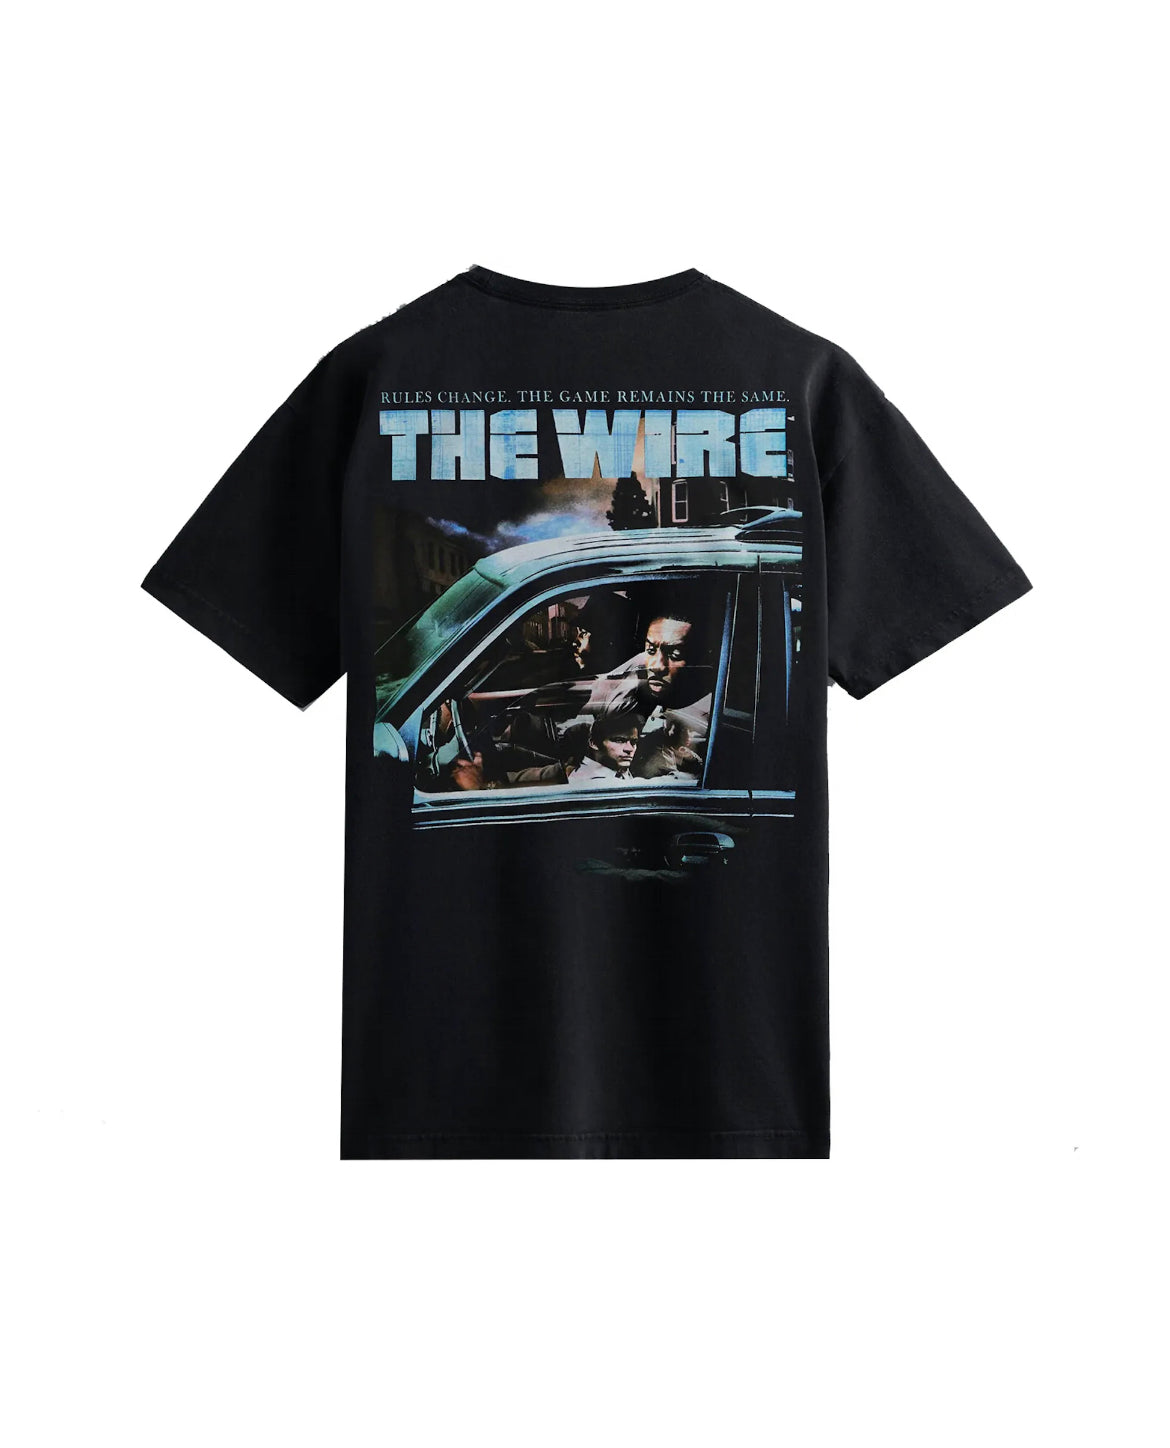 Kith x The Wire ‘Rules Change’ Vintage Tee Black